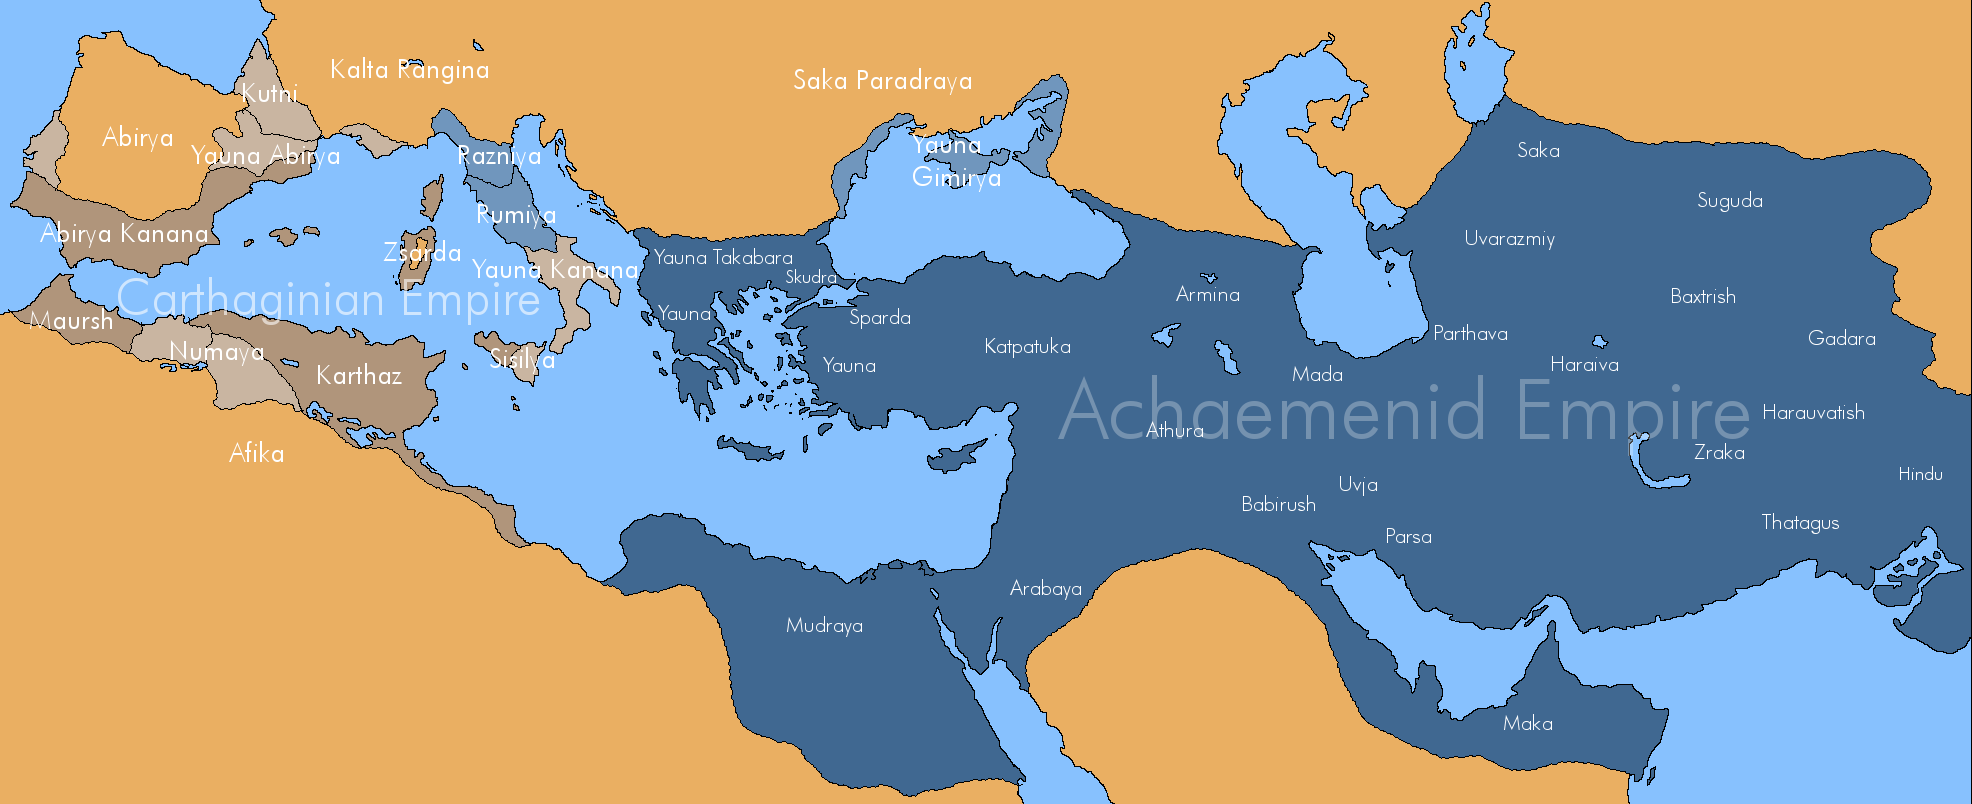 achaemenid_empire_engorged_by_daeres-d5sxia8.png